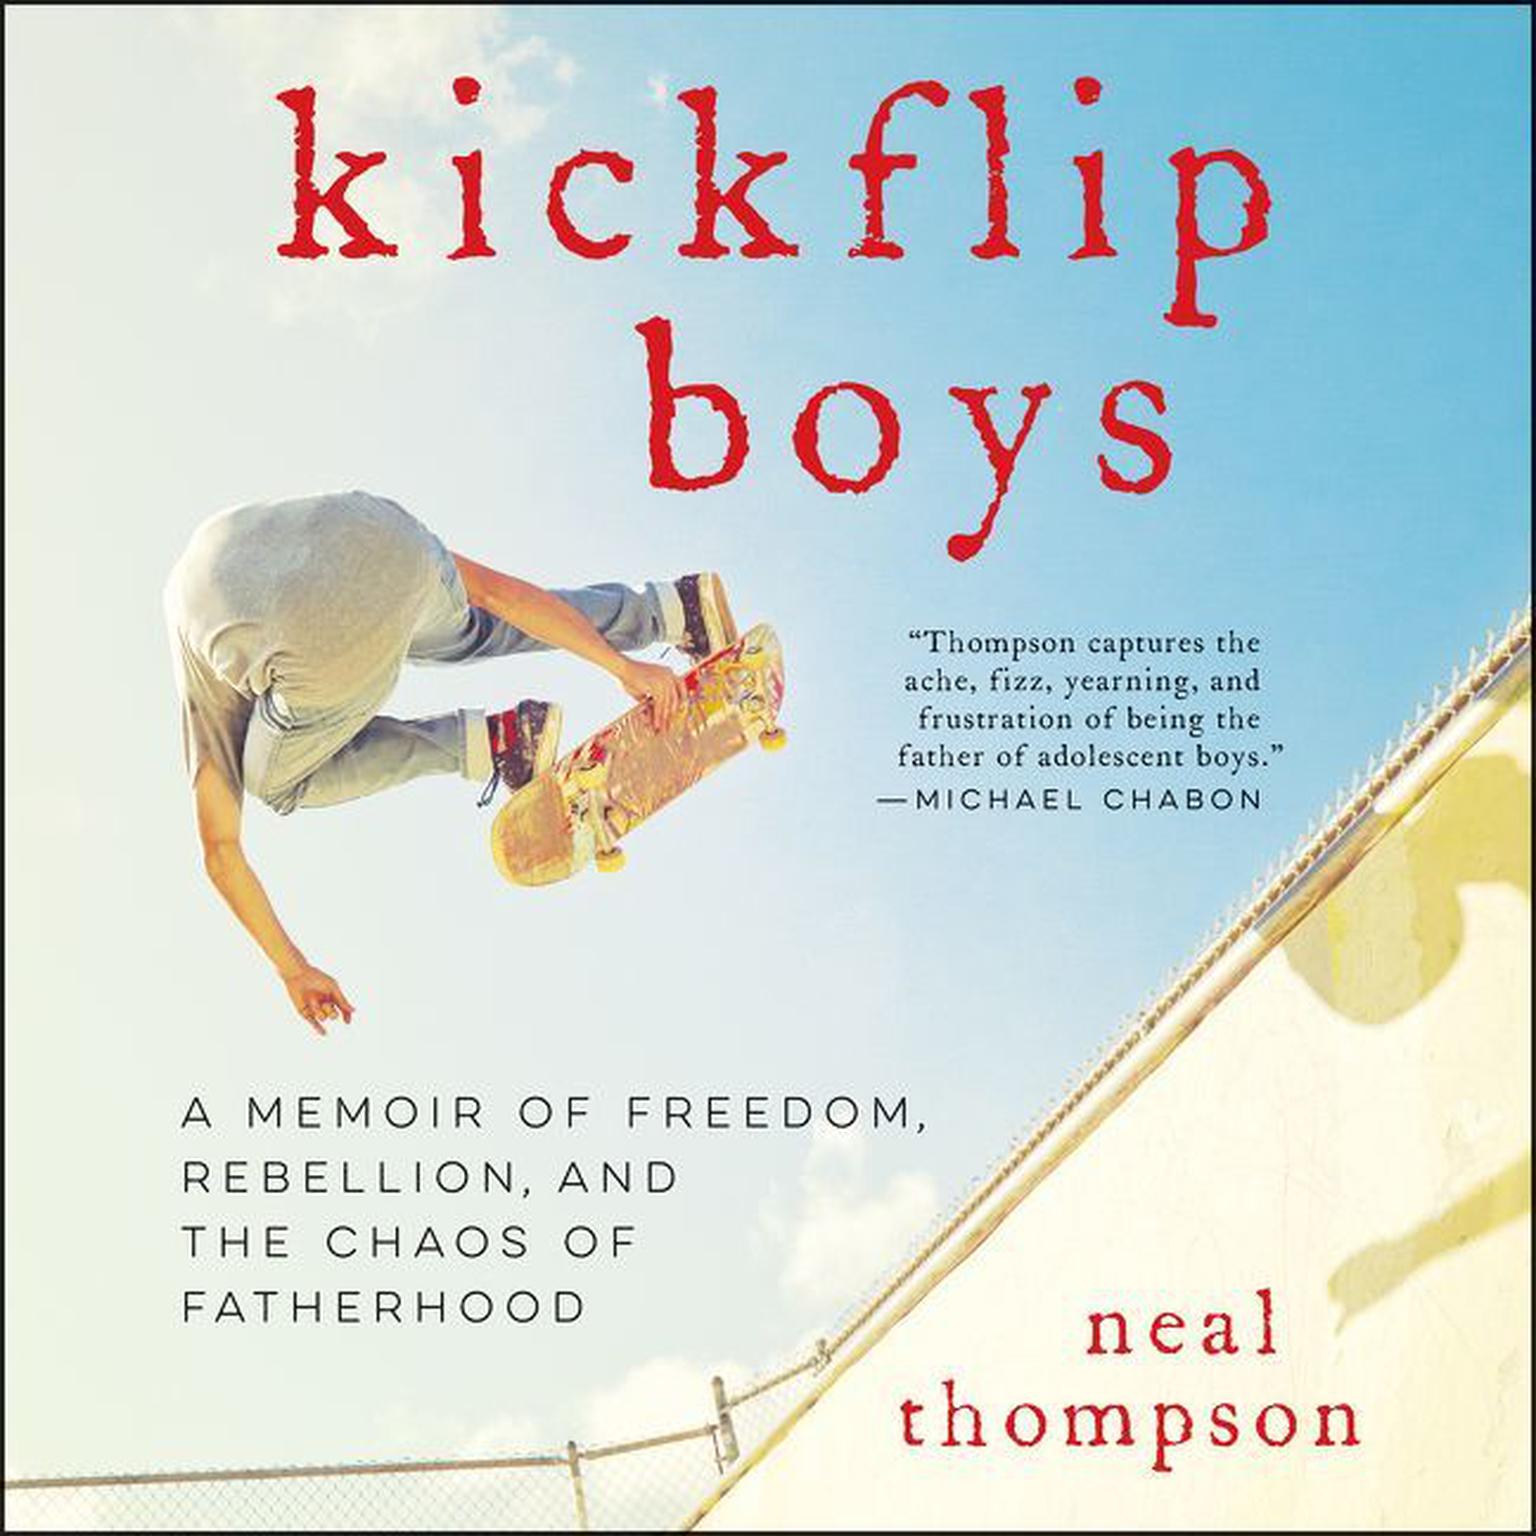 Kickflip Boys: A Memoir of Freedom, Rebellion, and the Chaos of Fatherhood Audiobook, by Neal Thompson